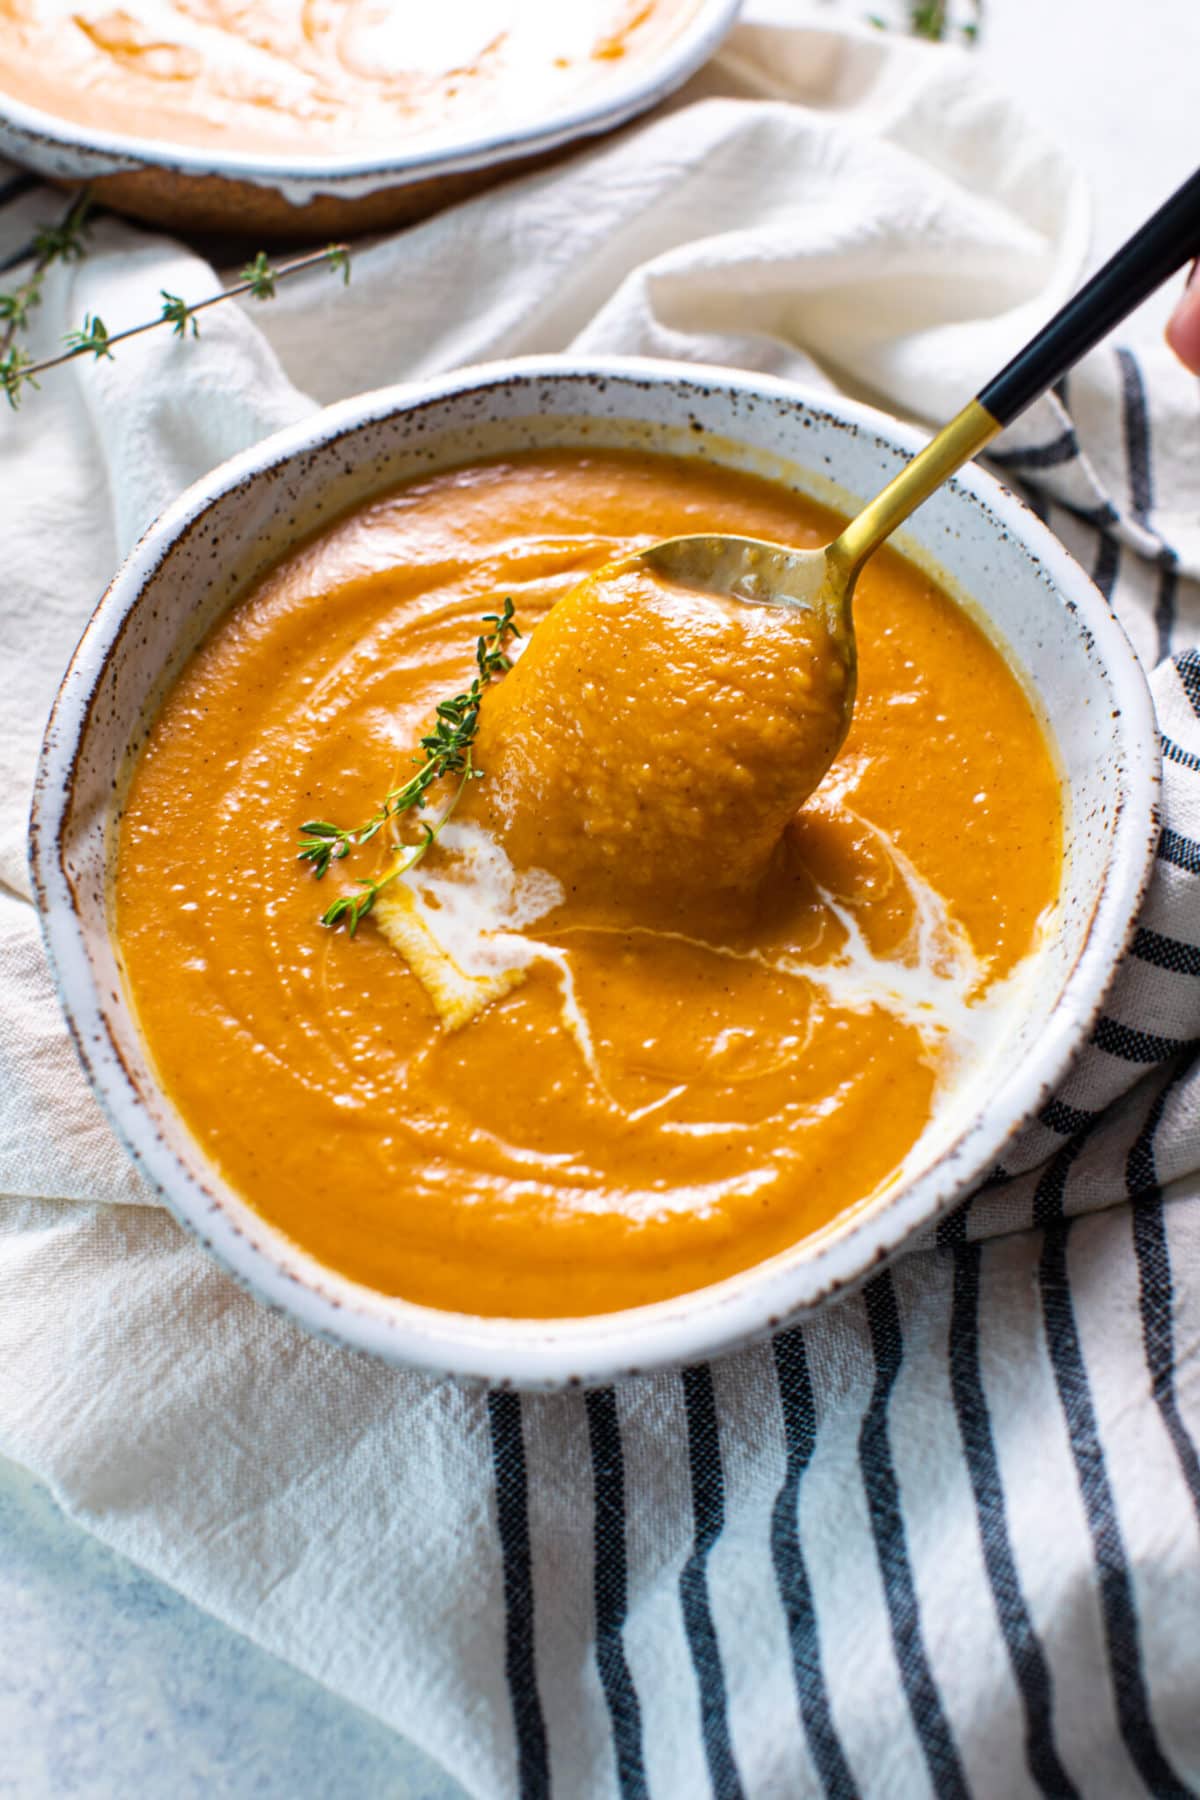 Vegan Pumpkin Soup from Jessica in the Kitchen